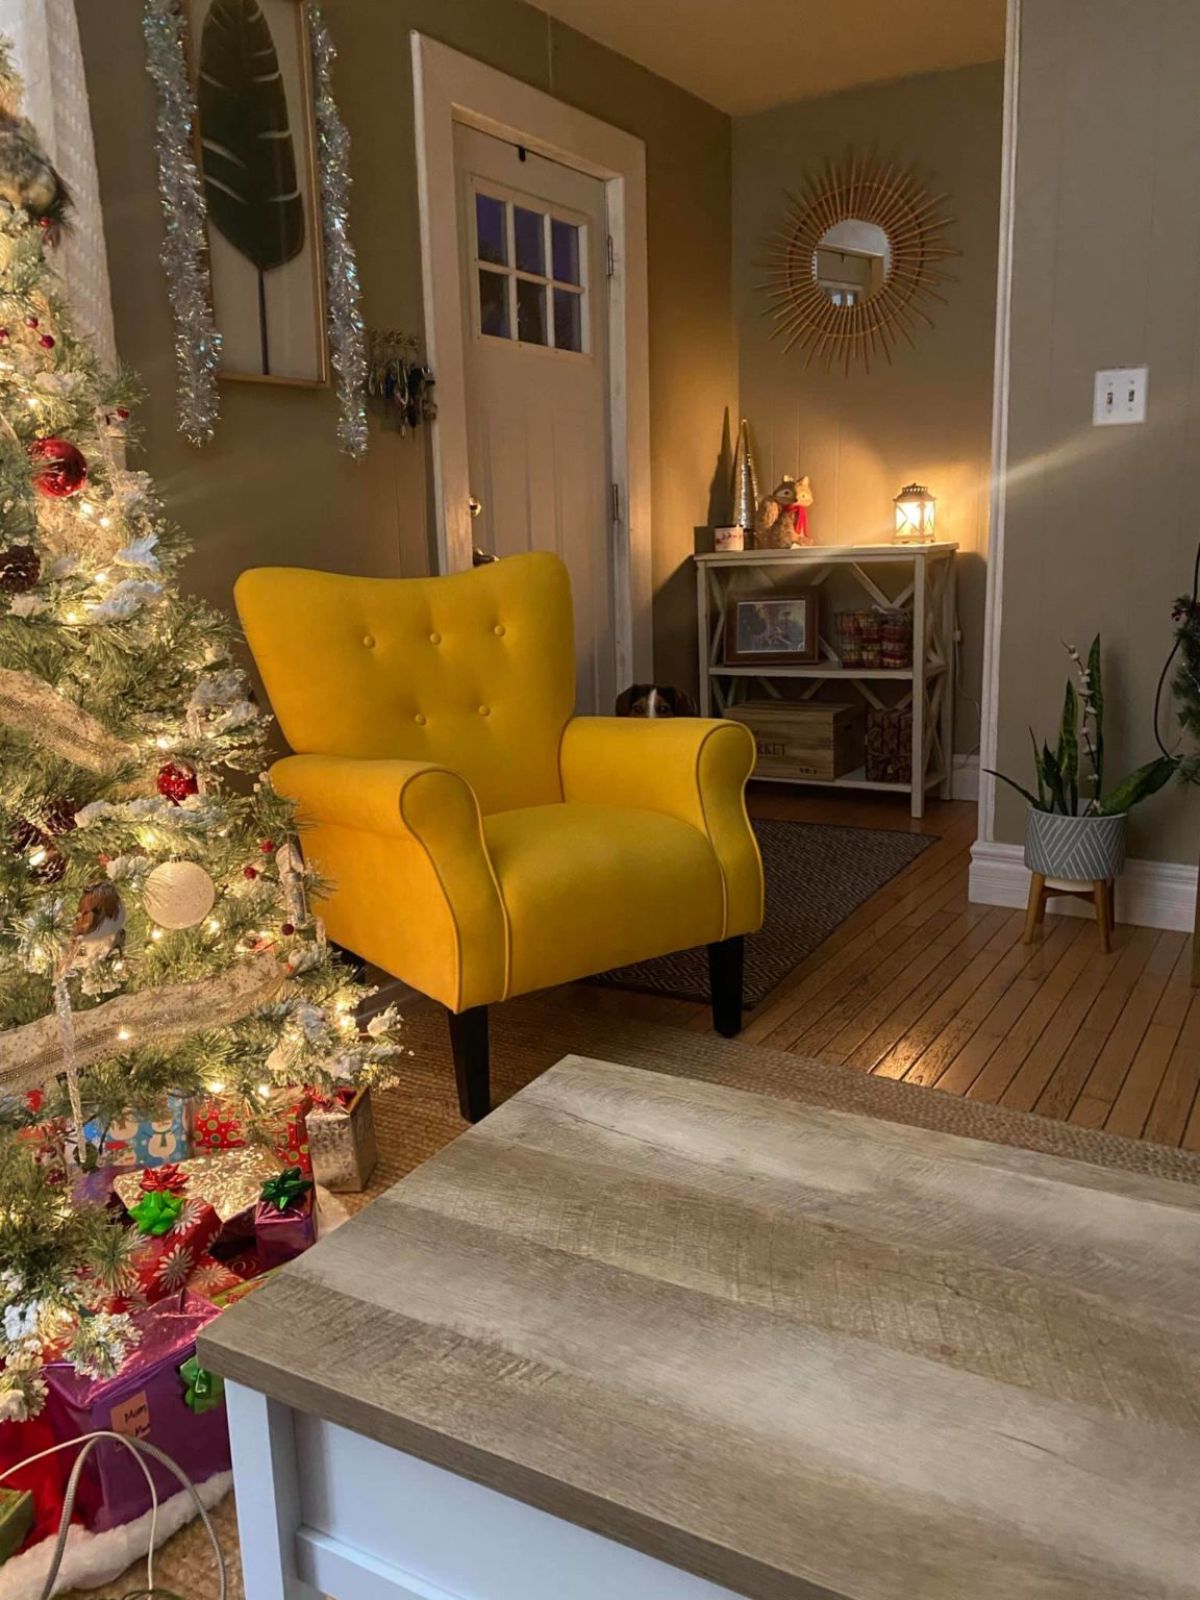 brown black and white dog peeking from behind a yellow chair next to a christmas tree